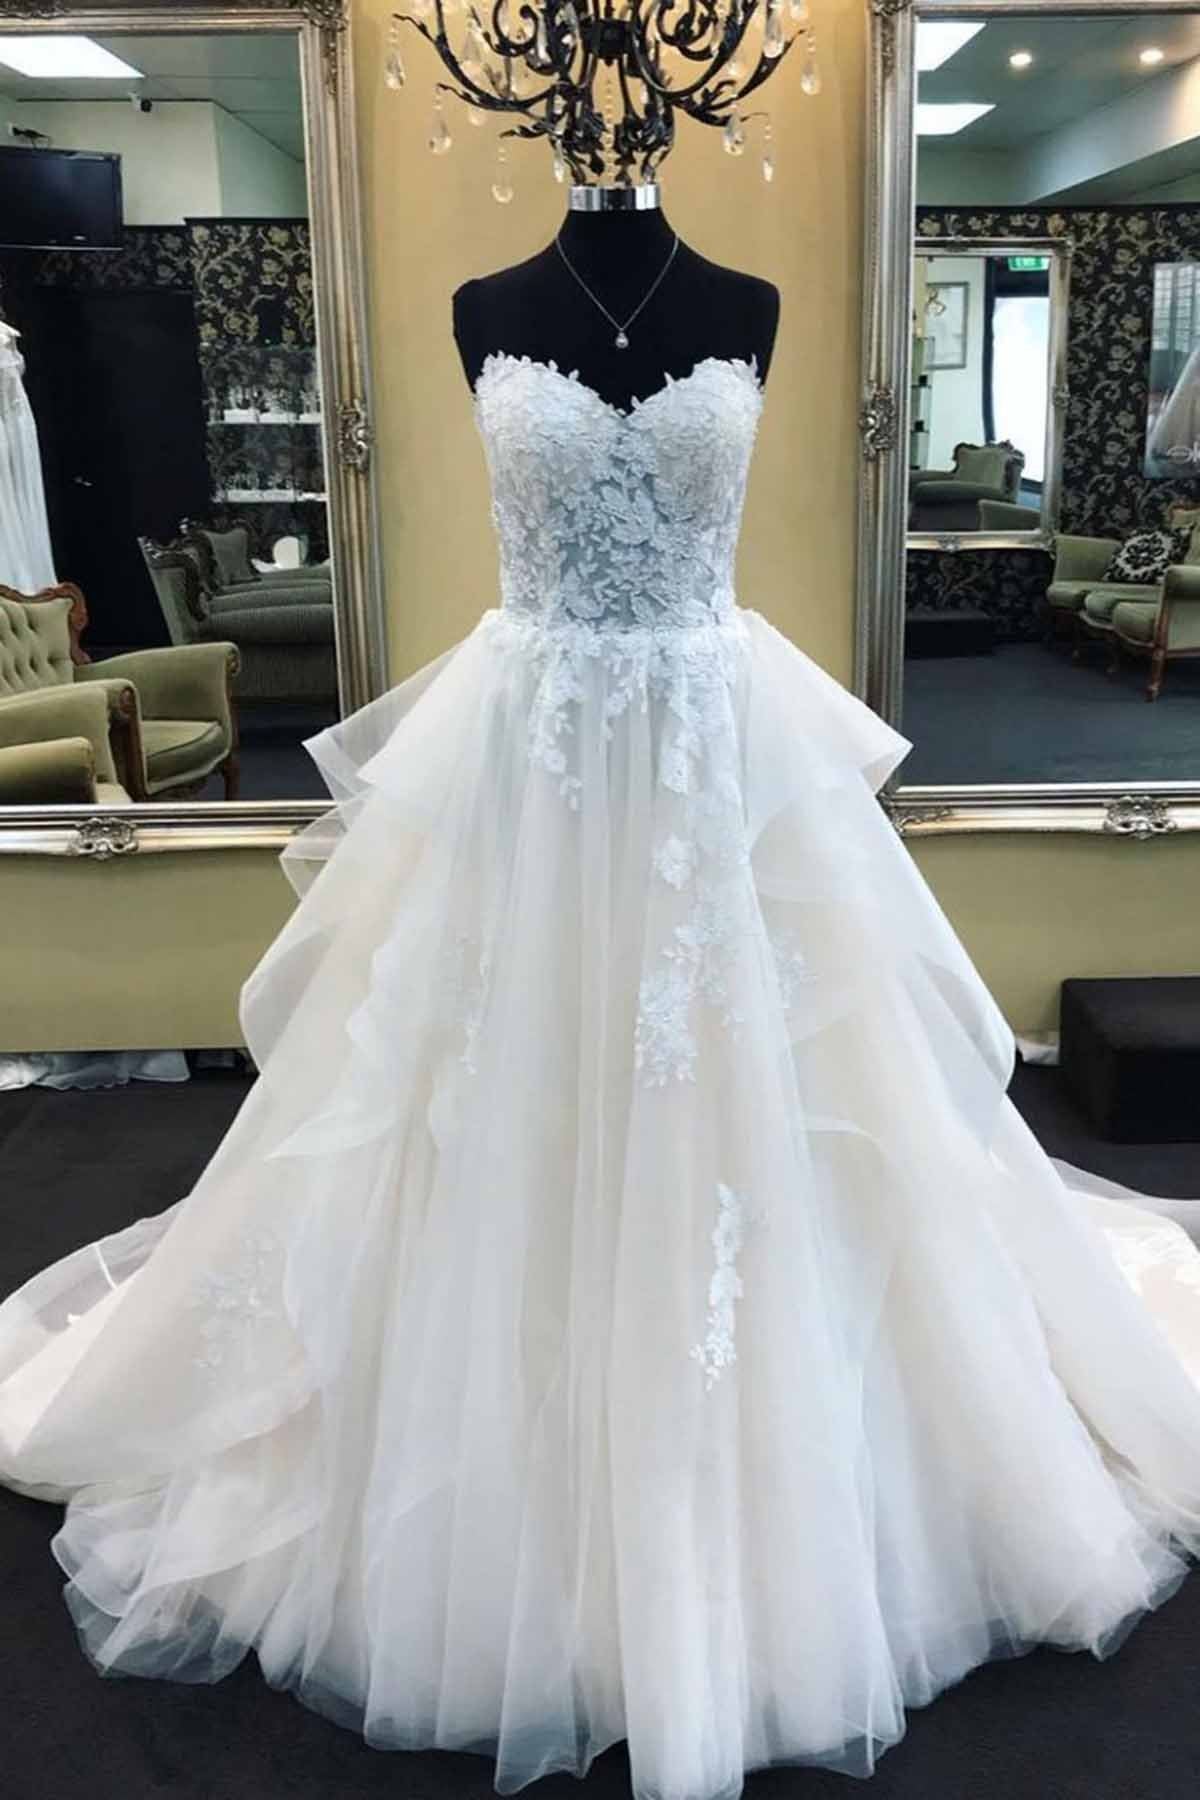 Wedding Dress Pricing, Biztunnel Long A-Line Strapless Lace Tulle Wedding Dress